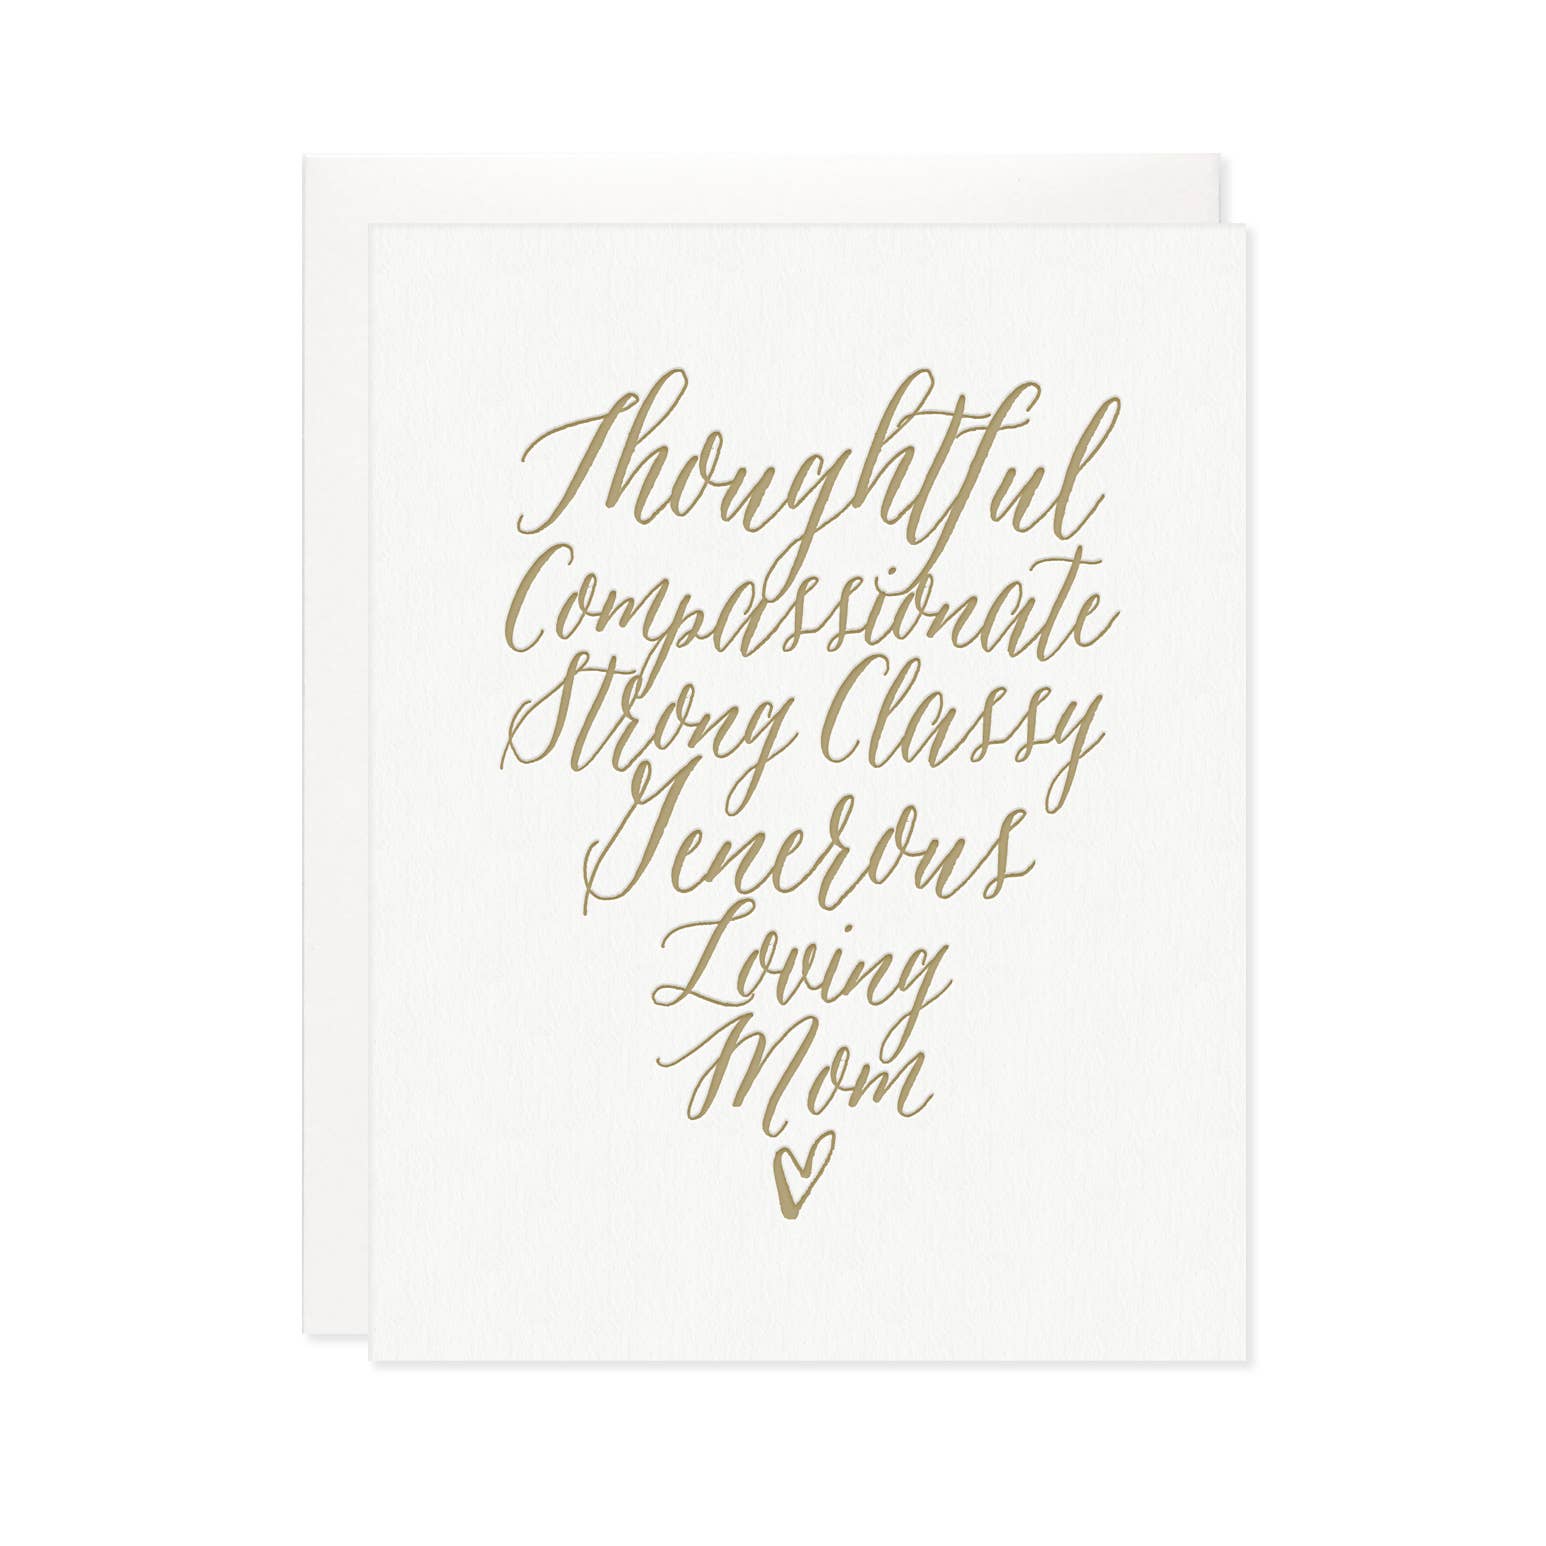 Thoughtful Compassionate Strong Classy Generous Loving Mom Script Heart - Mother's Day Greeting Card - Mellow Monkey